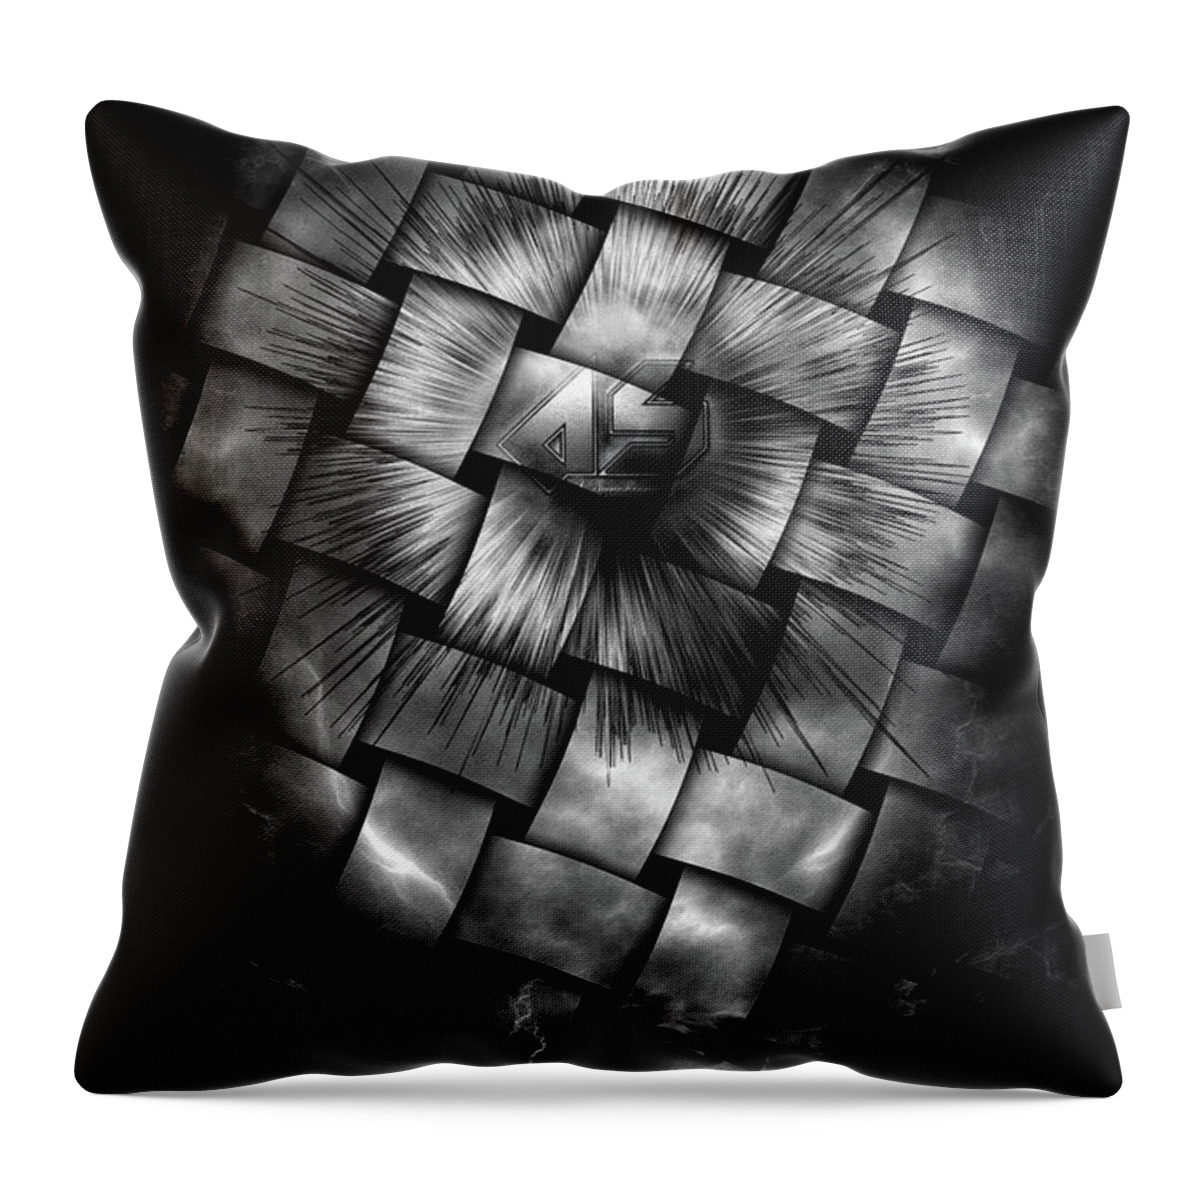 A-synchronous Throw Pillow featuring the digital art A-Synchronous Ethereal Clouds Weave by Rolando Burbon